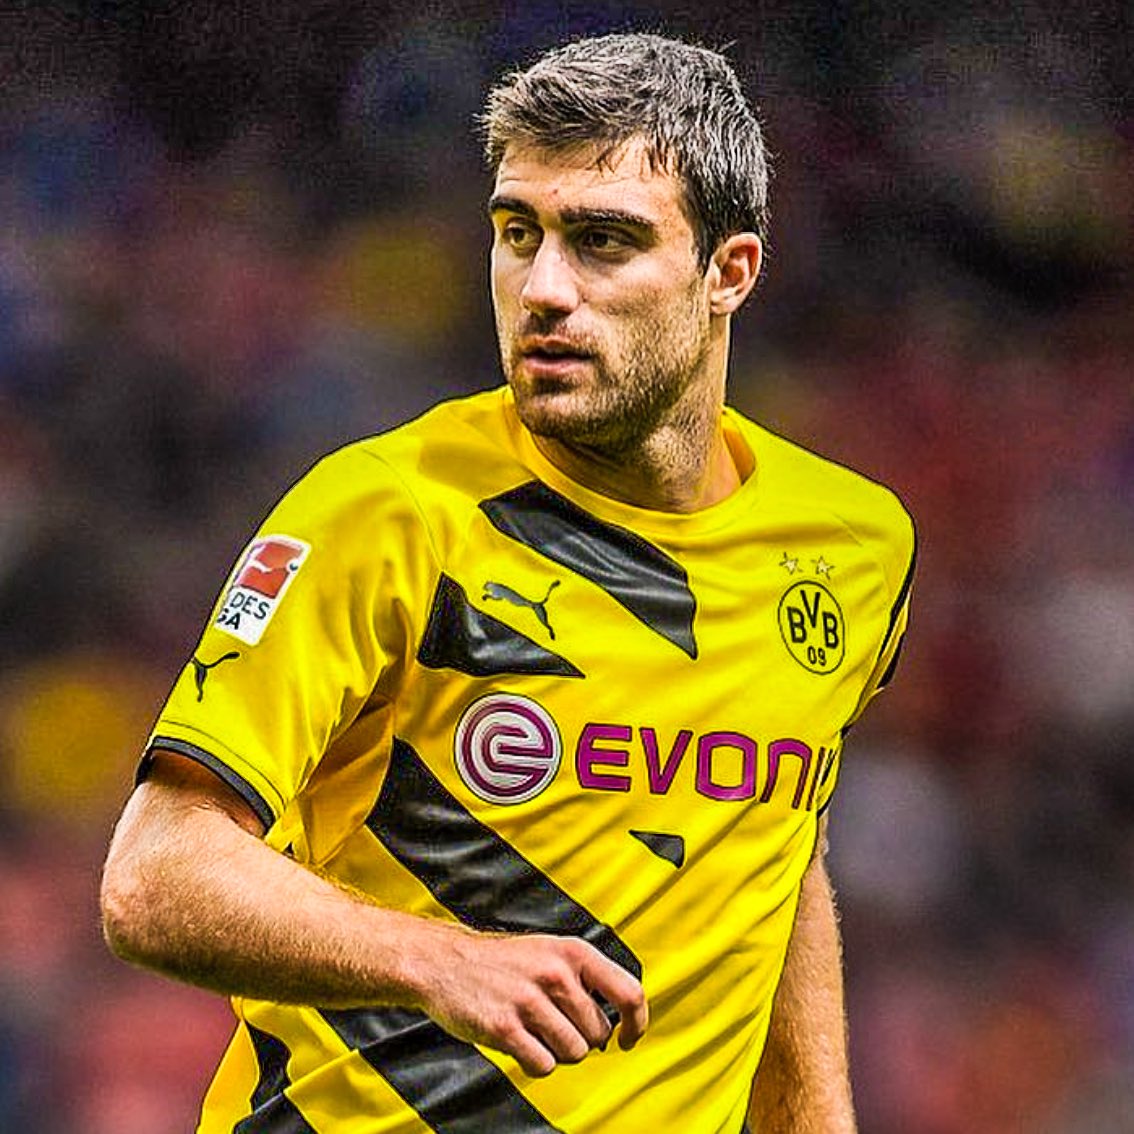 🚨🇬🇷 𝐎𝐅𝐅𝐈𝐂𝐈𝐀𝐋 | Sokratis Papastathopoulos (35) will RETIRE from football at the end of the season! 👋 600+ professional apps and 7 trophies won across his career.